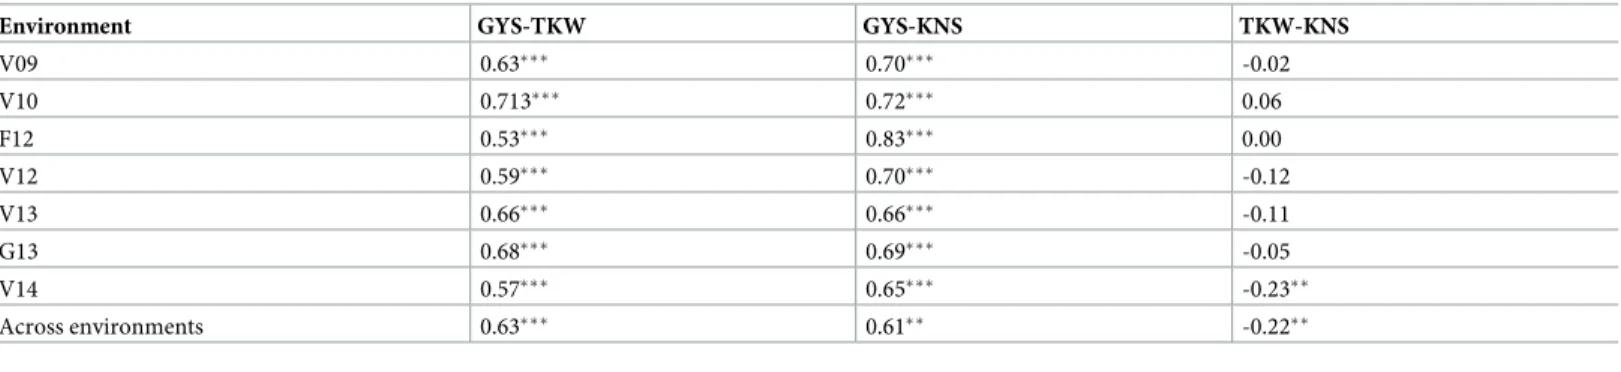 Table 2. Correlations between grain yield per spike (GYS), thousand-kernel weight (TKW) and kernel number per spike (KNS) in a tetraploid wheat collection eval- eval-uated in seven environments.